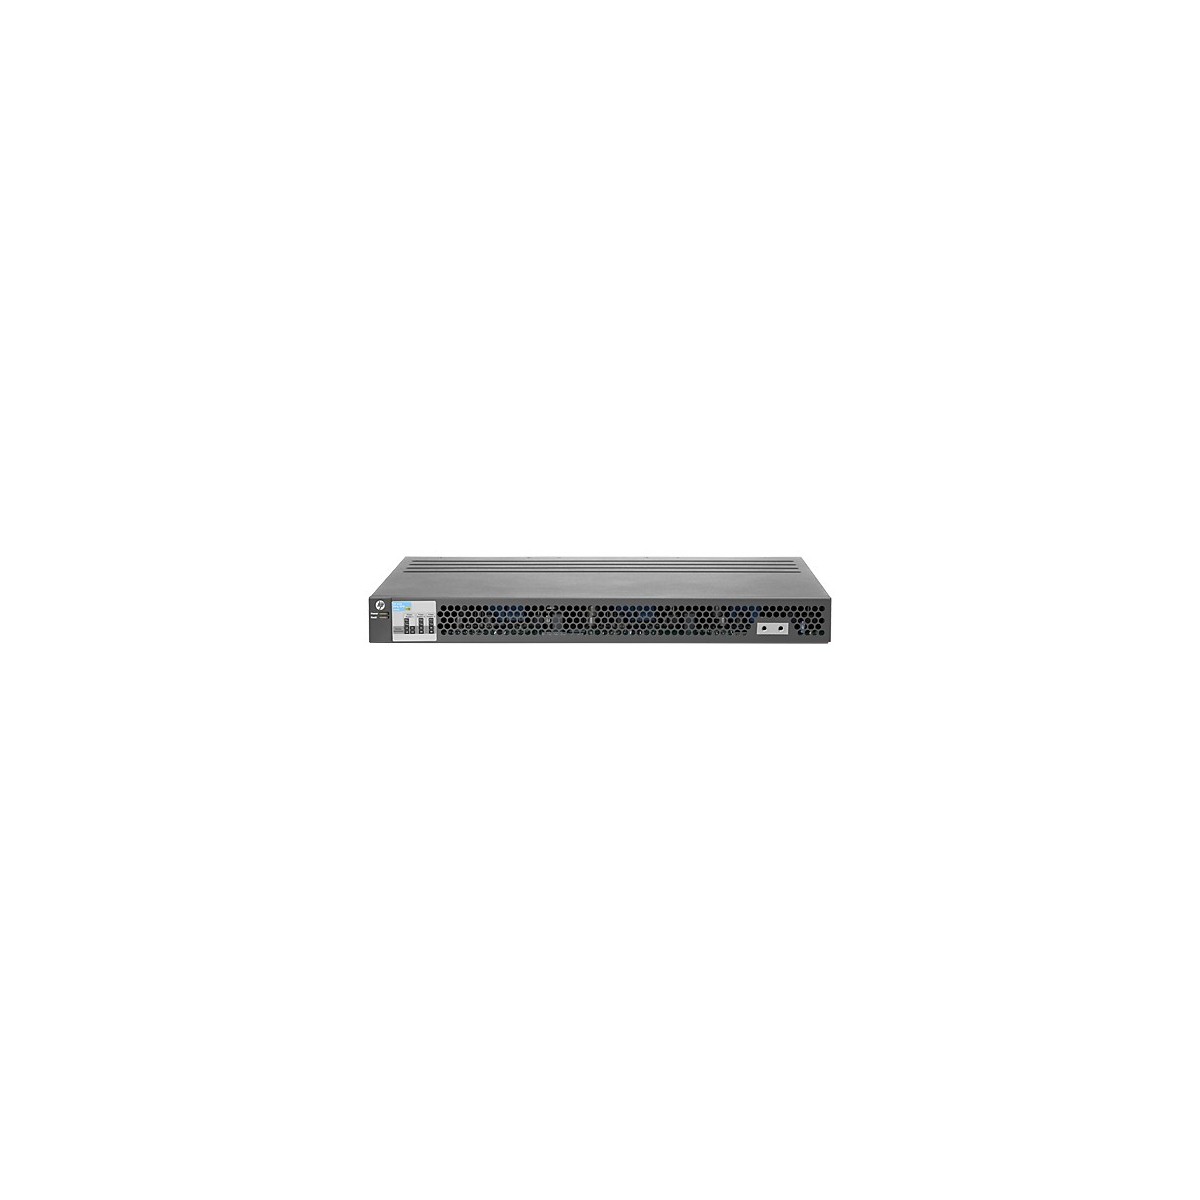 HPE J9805A - 442 mm - 322.6 mm - 44 mm